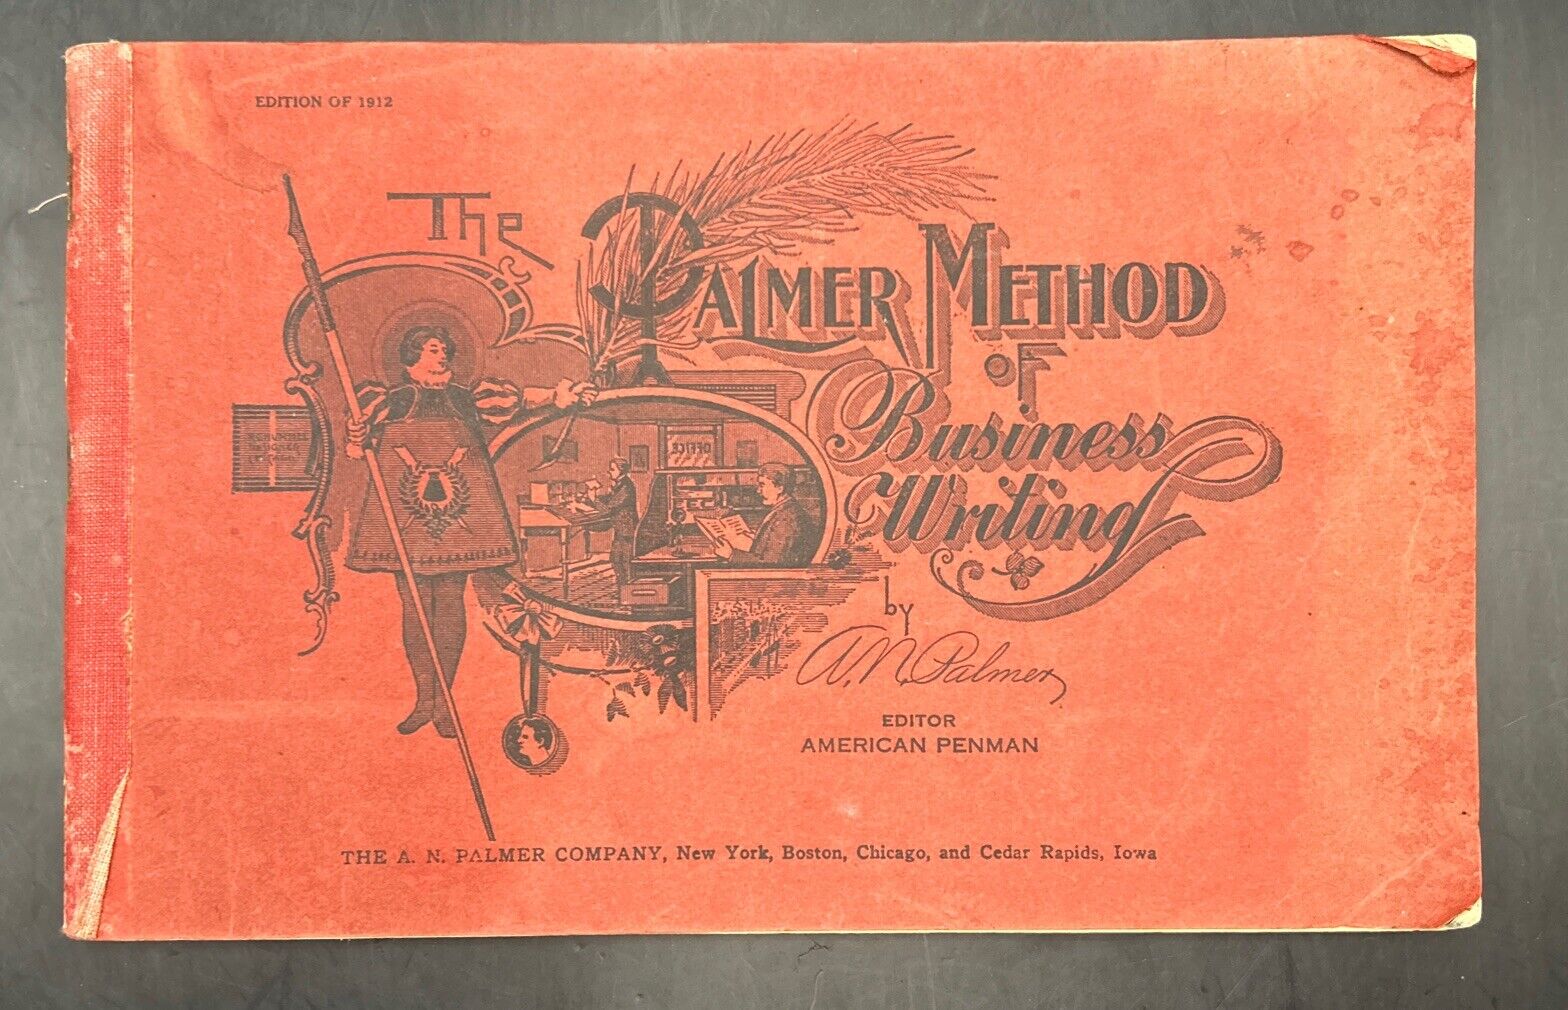 RARE ANTIQUE The Palmer Method of Business Writing, A.N. Palmer, 1915, PPB